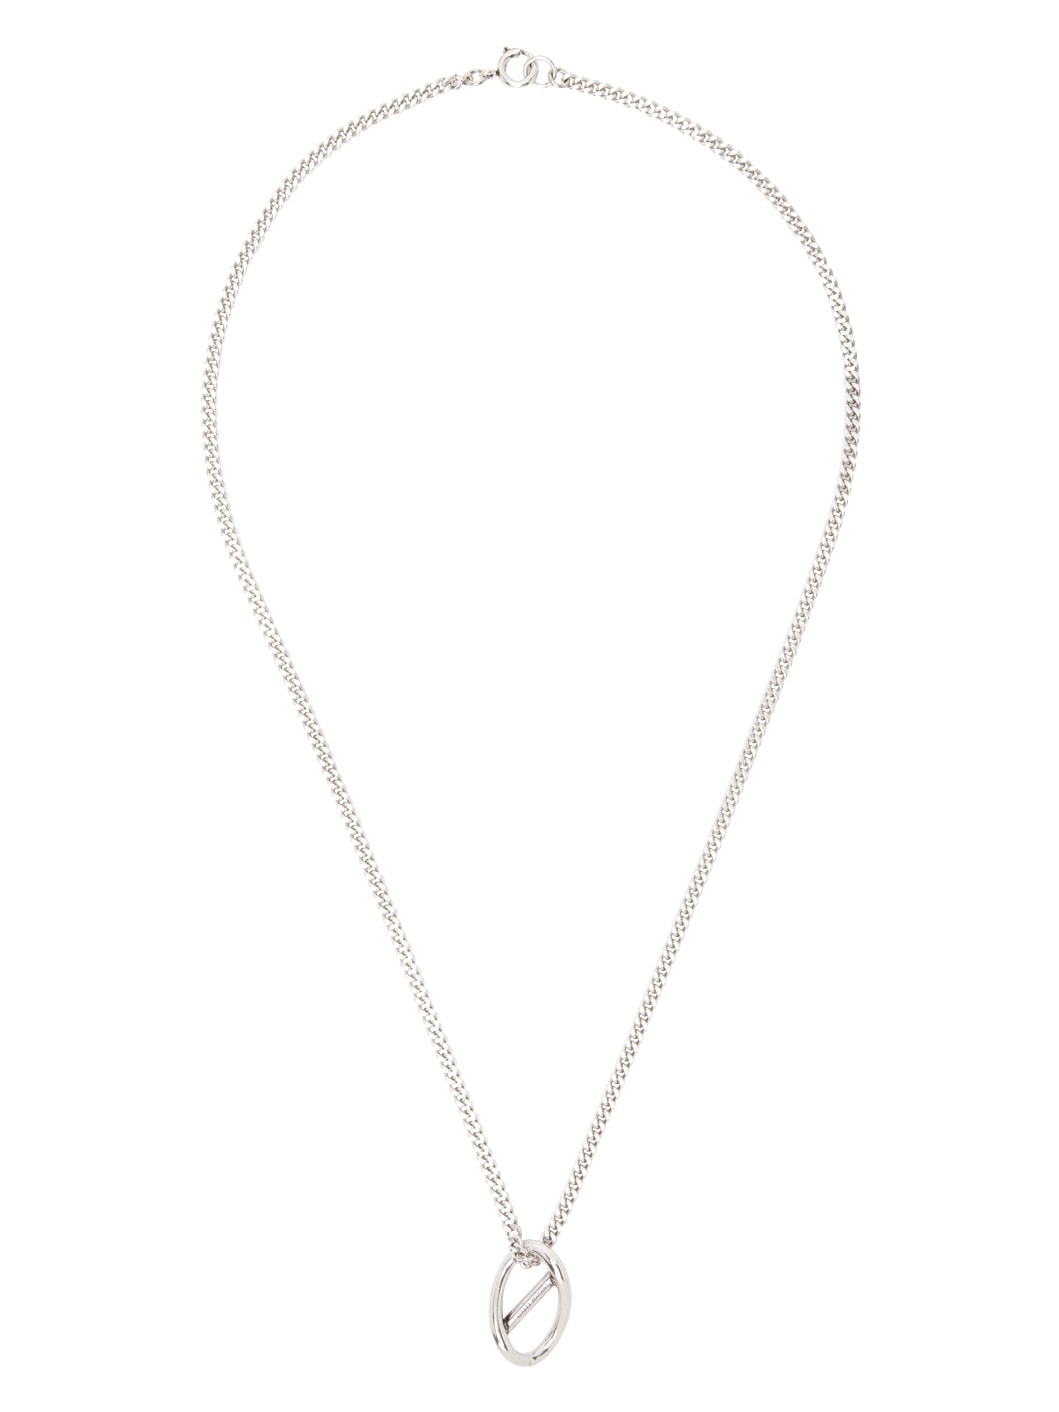 Silver Mood Day Necklace - 1